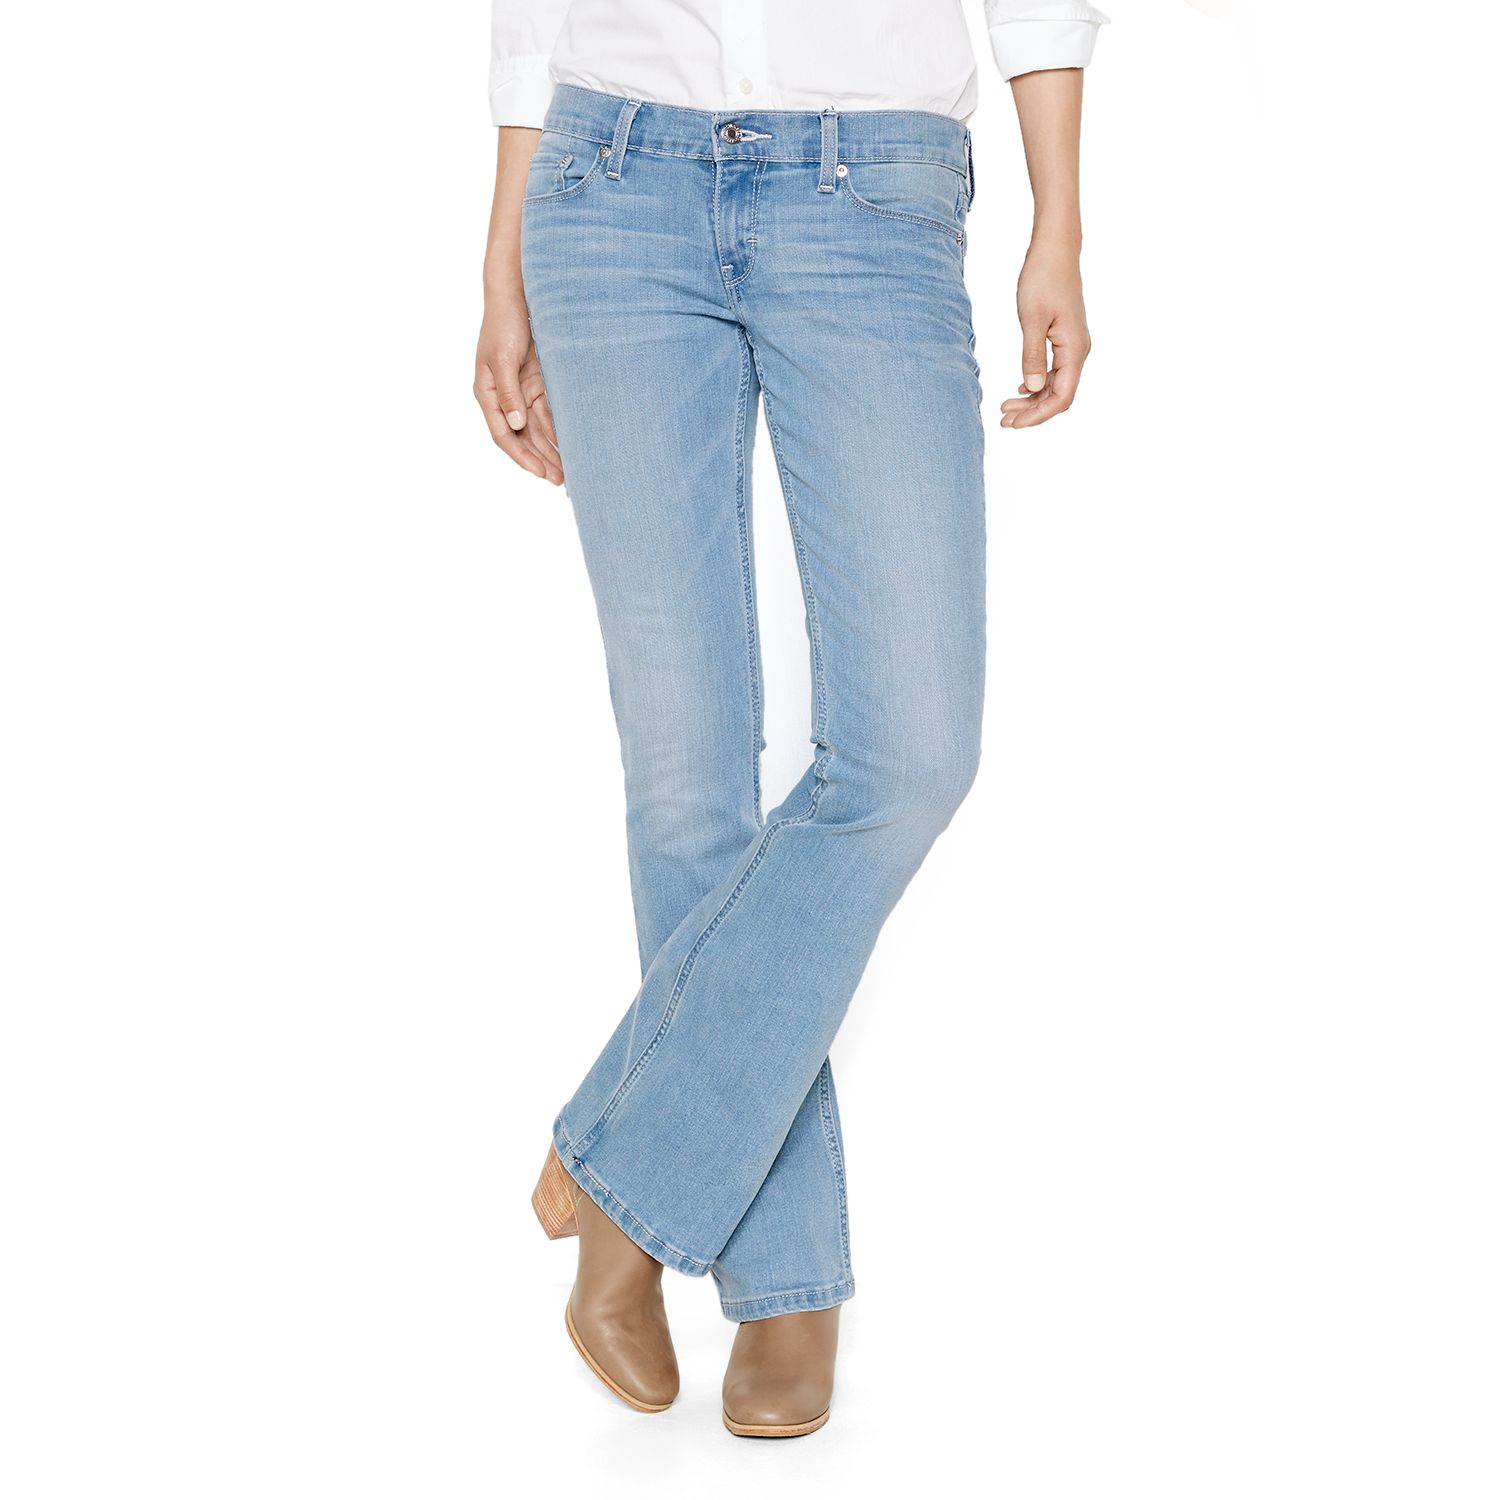 lucky brand jeans canada